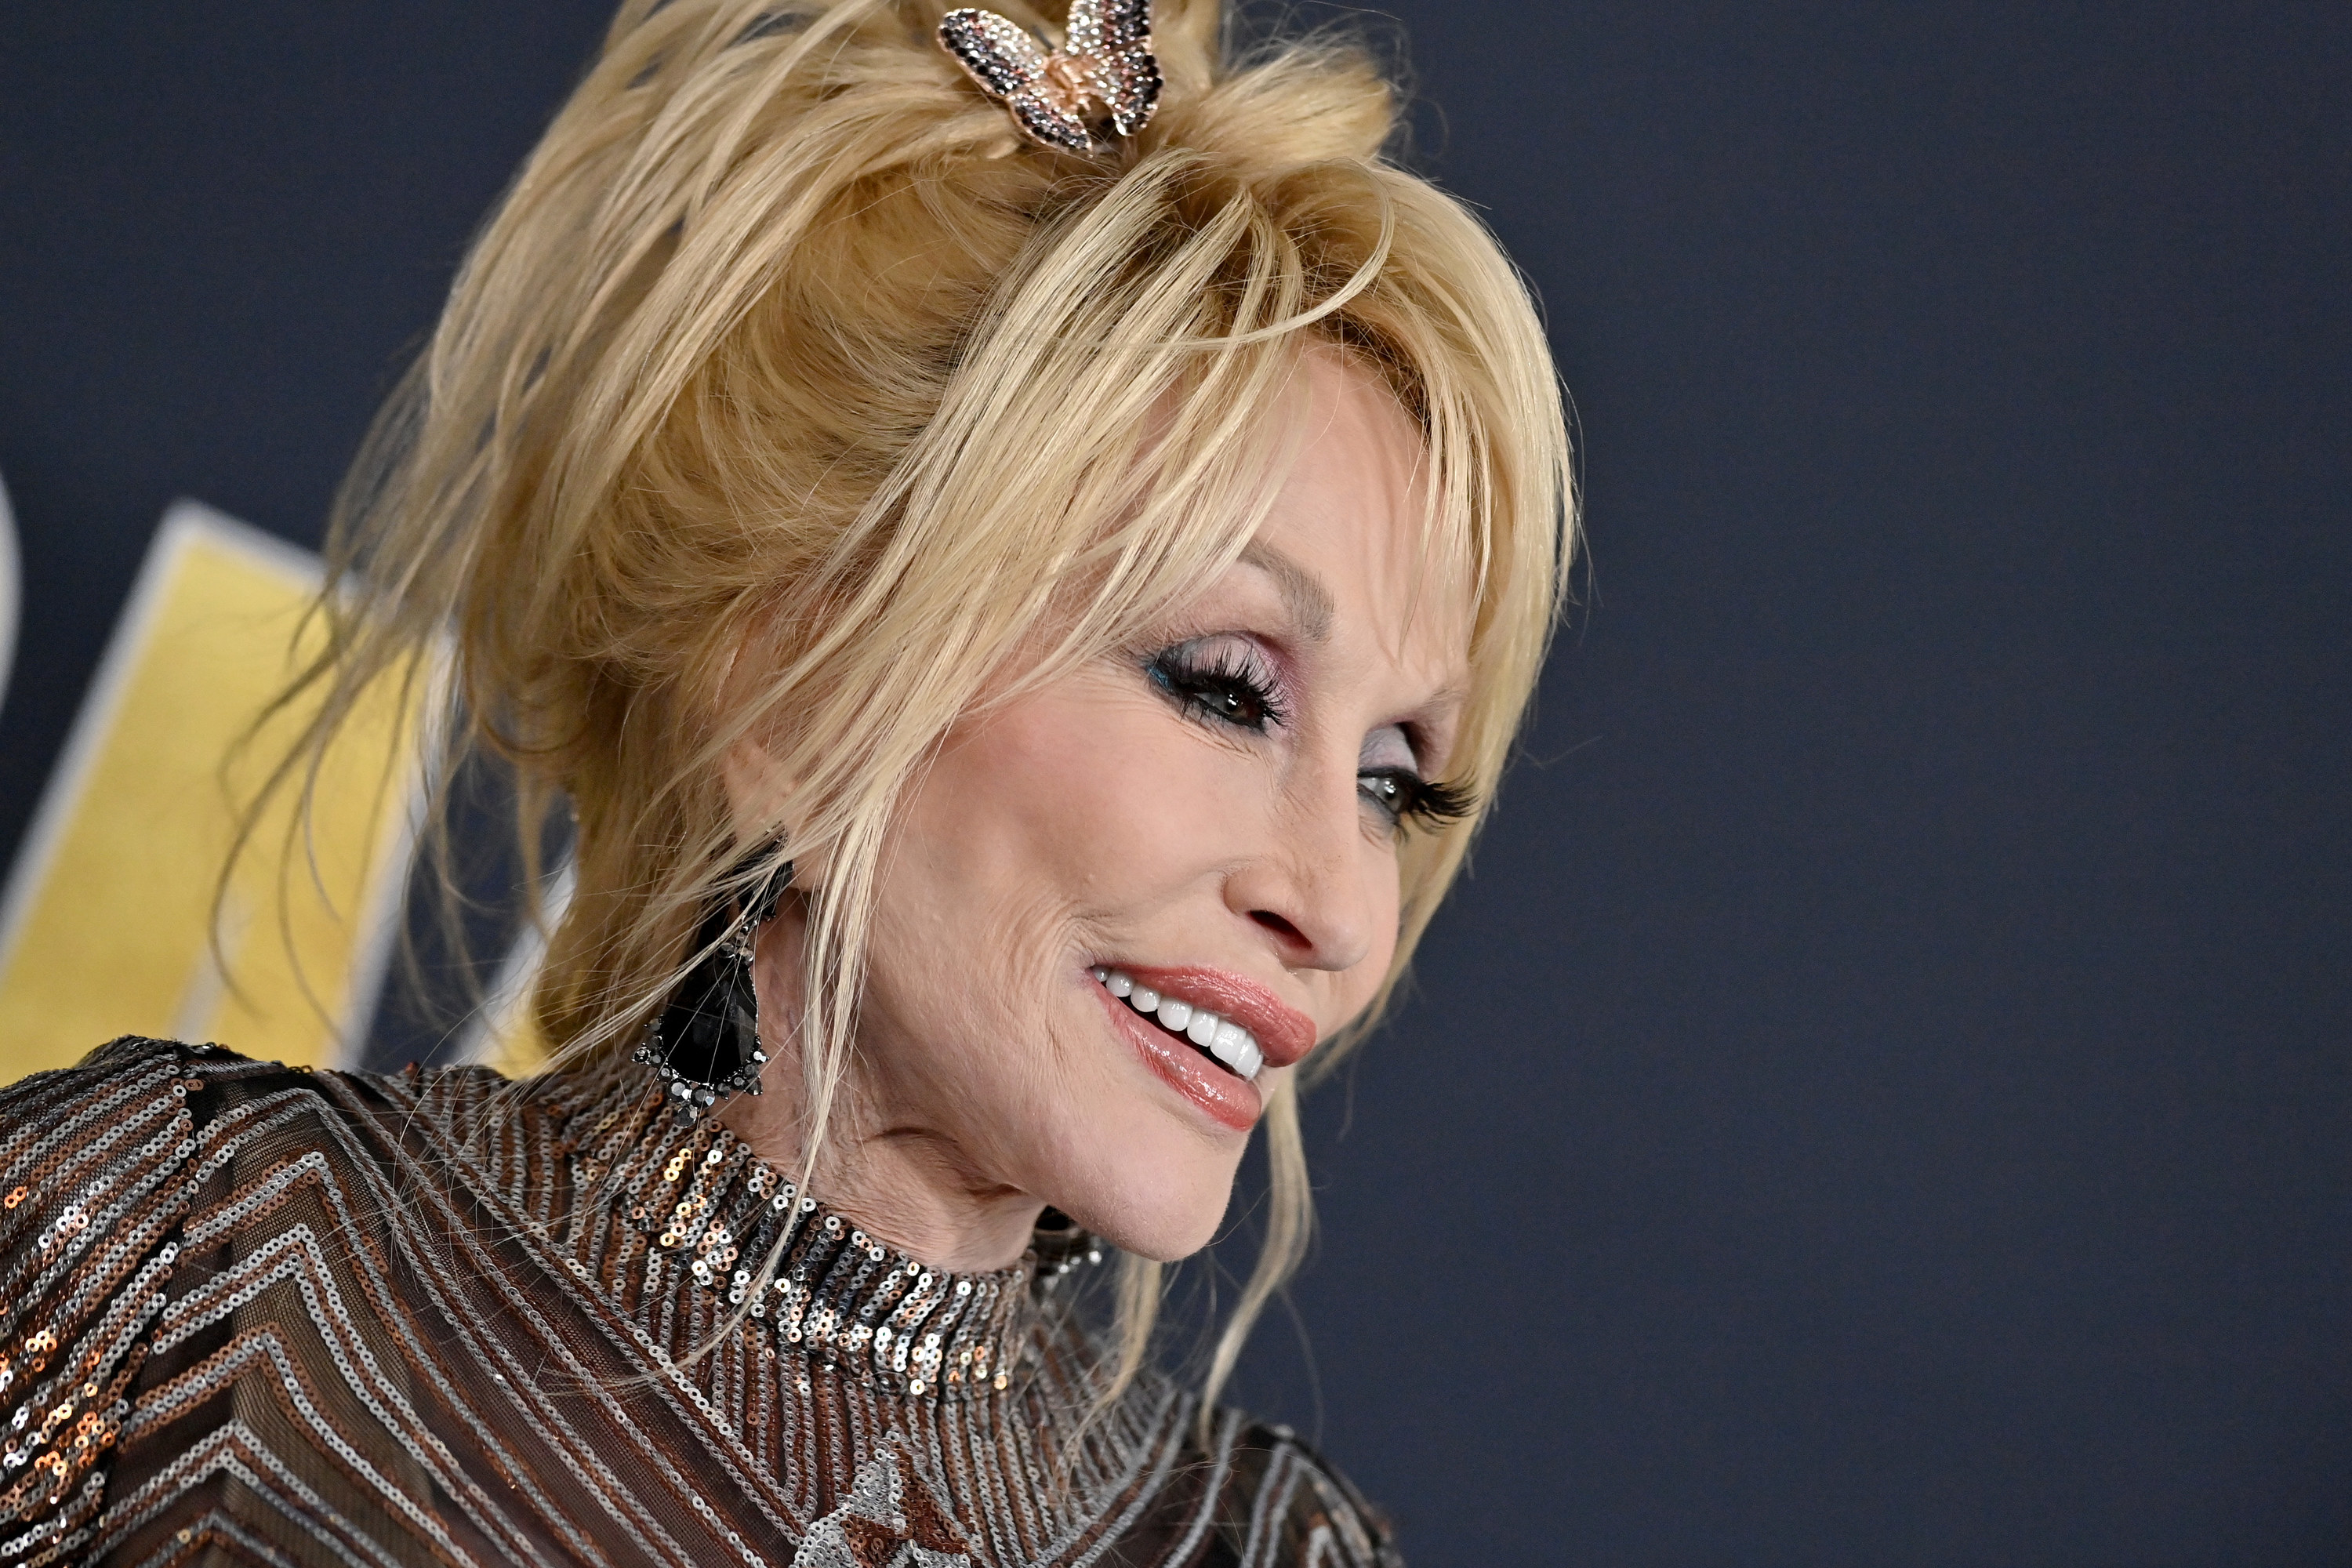 Dolly Parton attends the 57th Academy of Country Music Awards on March 07, 2022